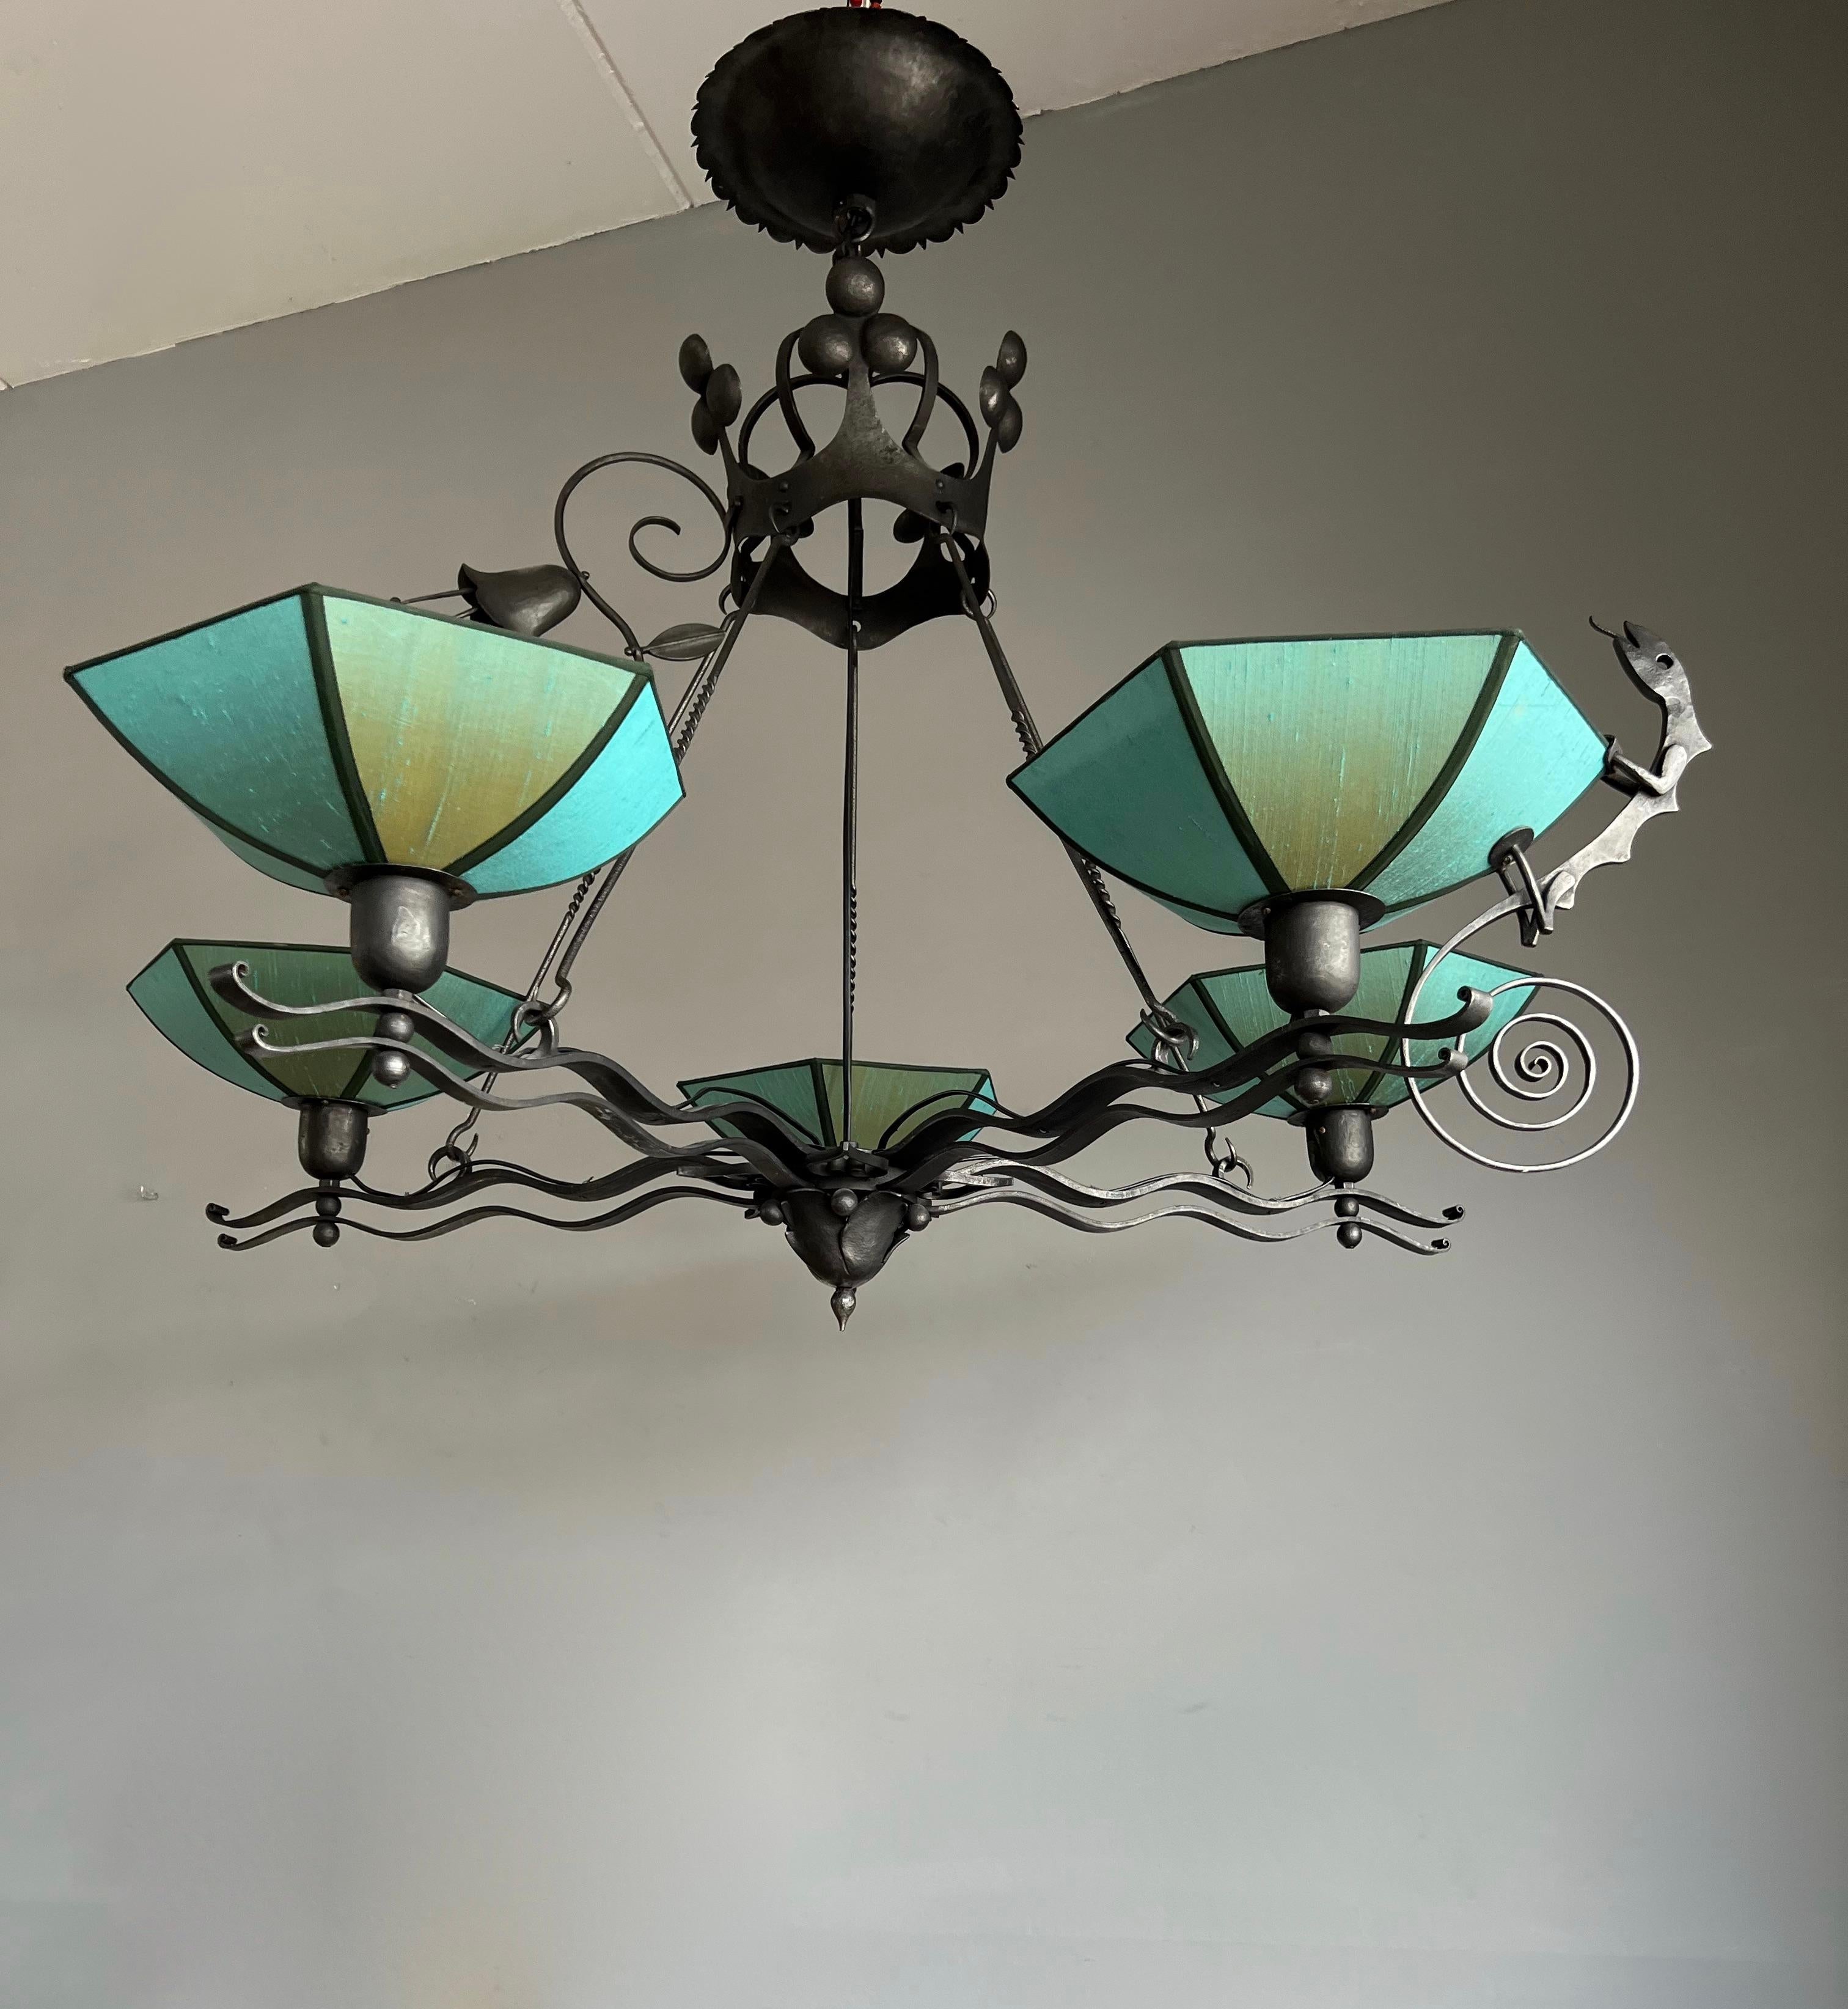 Amazing and skillfully handmade, wrought iron Art pendant.

This artistically designed and outstandingly executed wrought iron chandelier is in excellent condition and it comes with a mint and stunningly stylized salamander sculpture and an equally